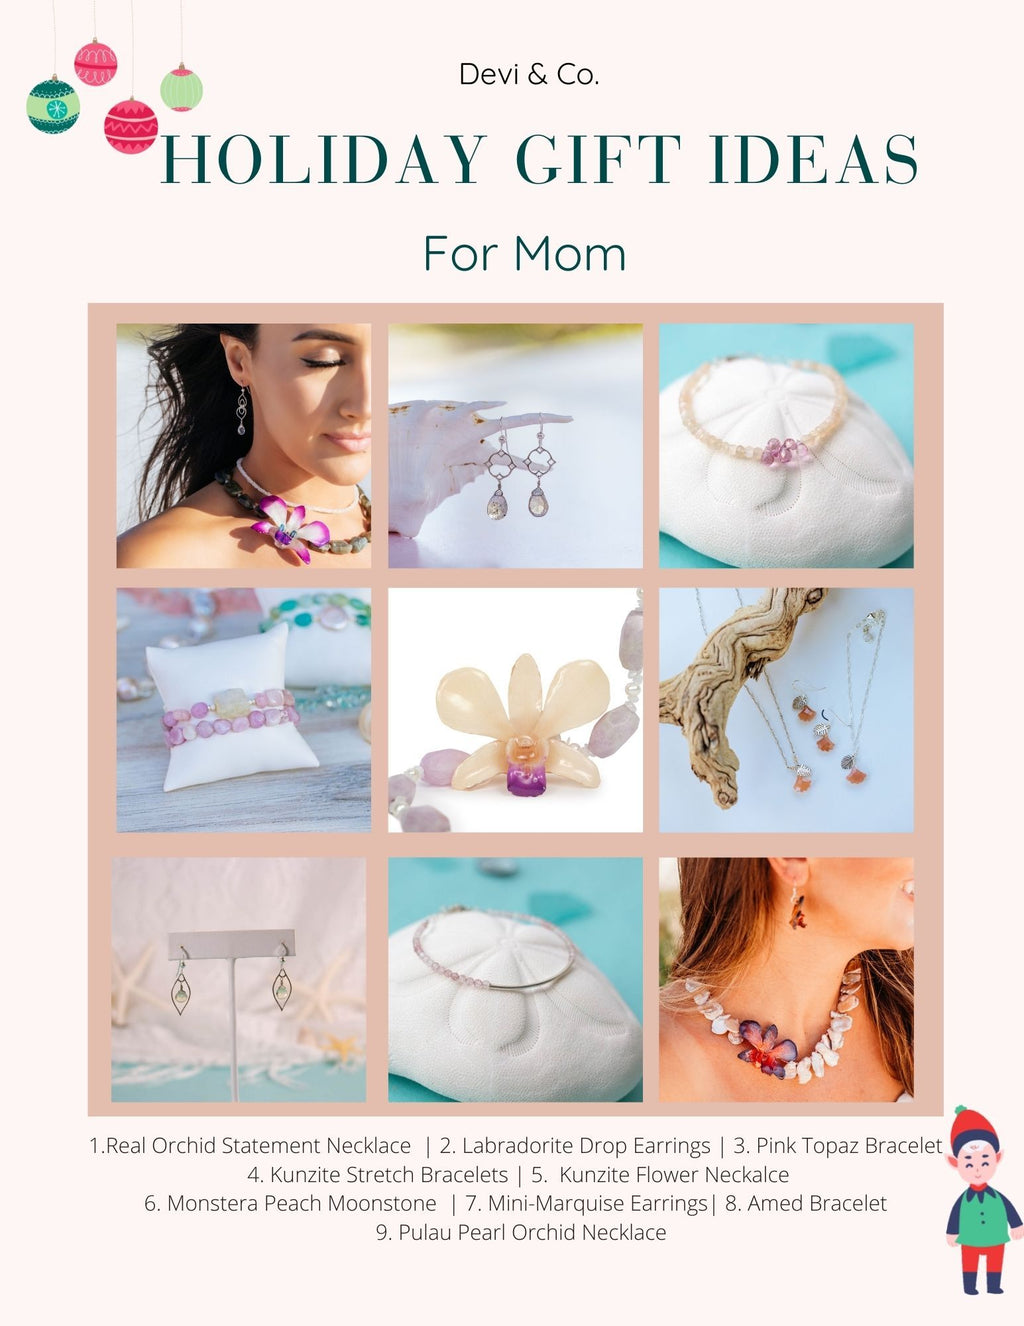 Holiday Gift Guide: Tropical Gifts for Mom - Devi & Co